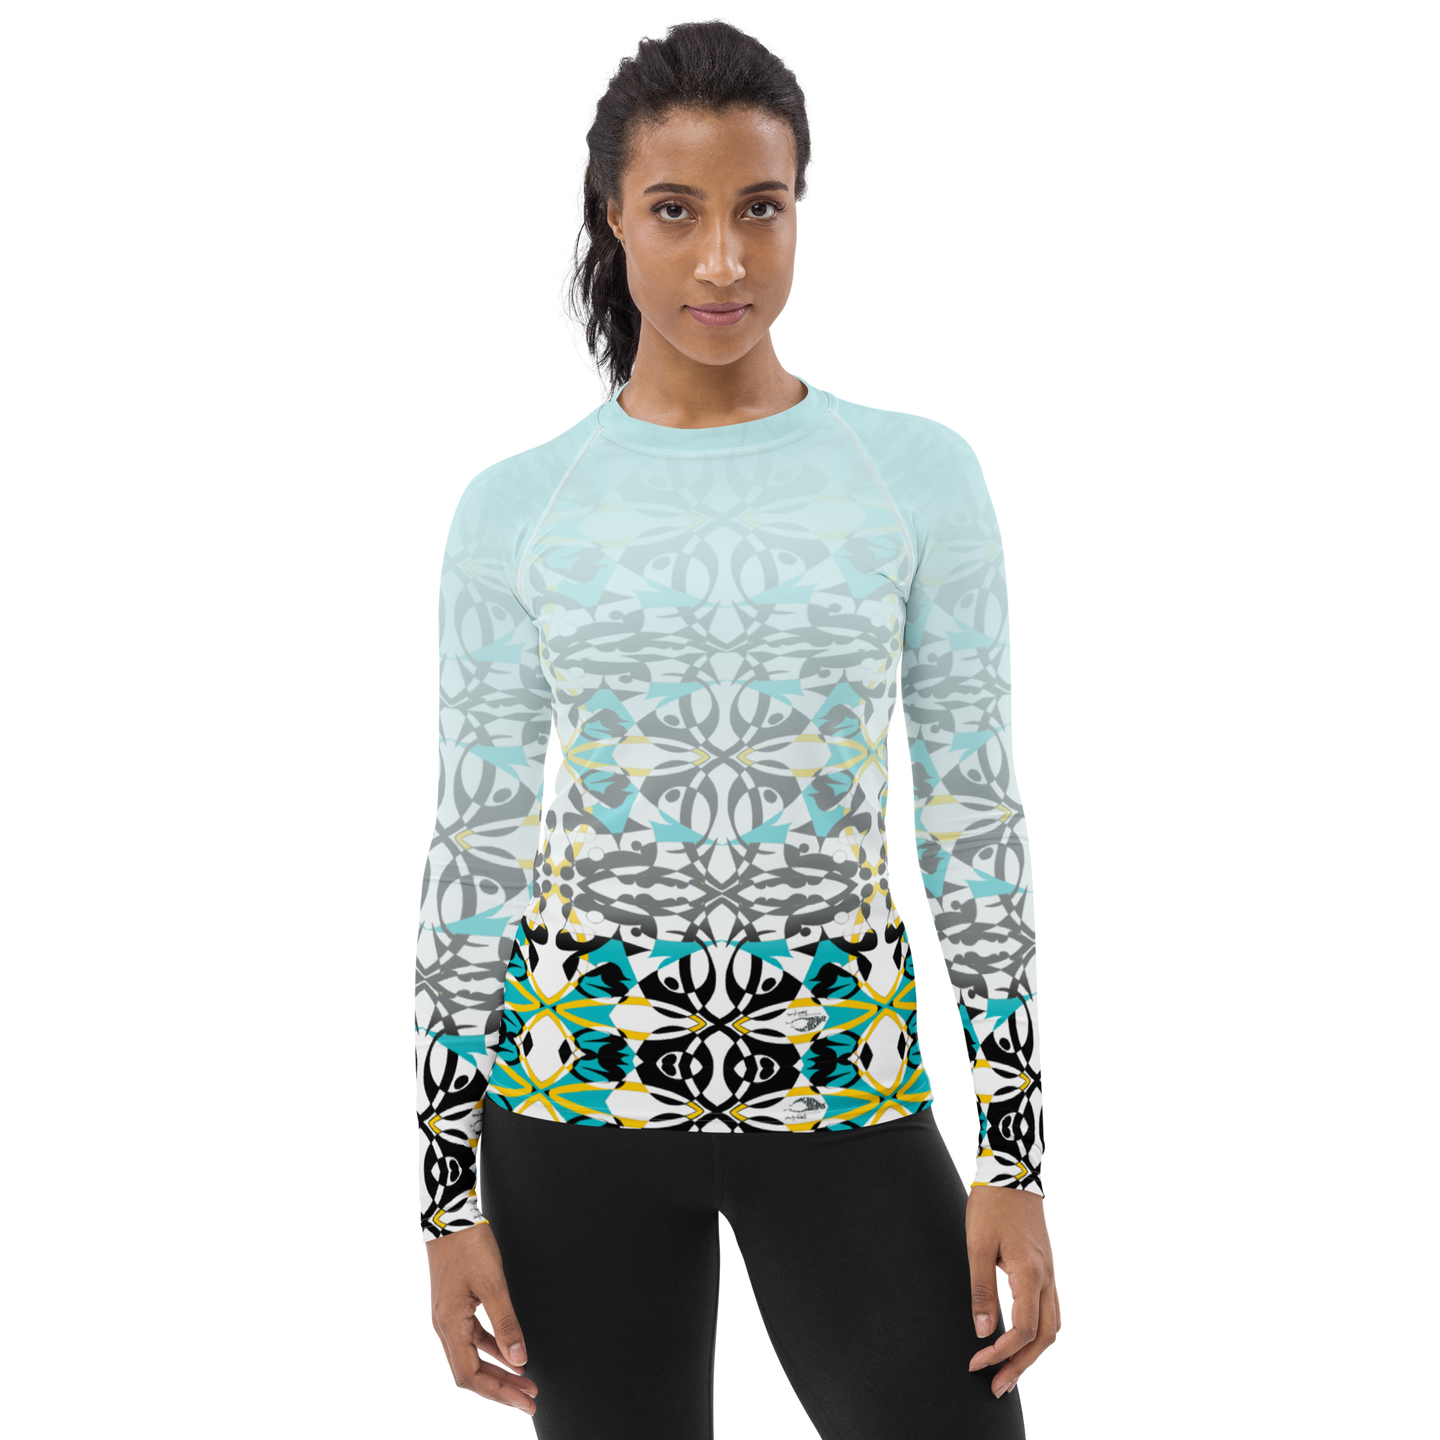 Wholesale Women's Rash Guard in Maui Mind and Body